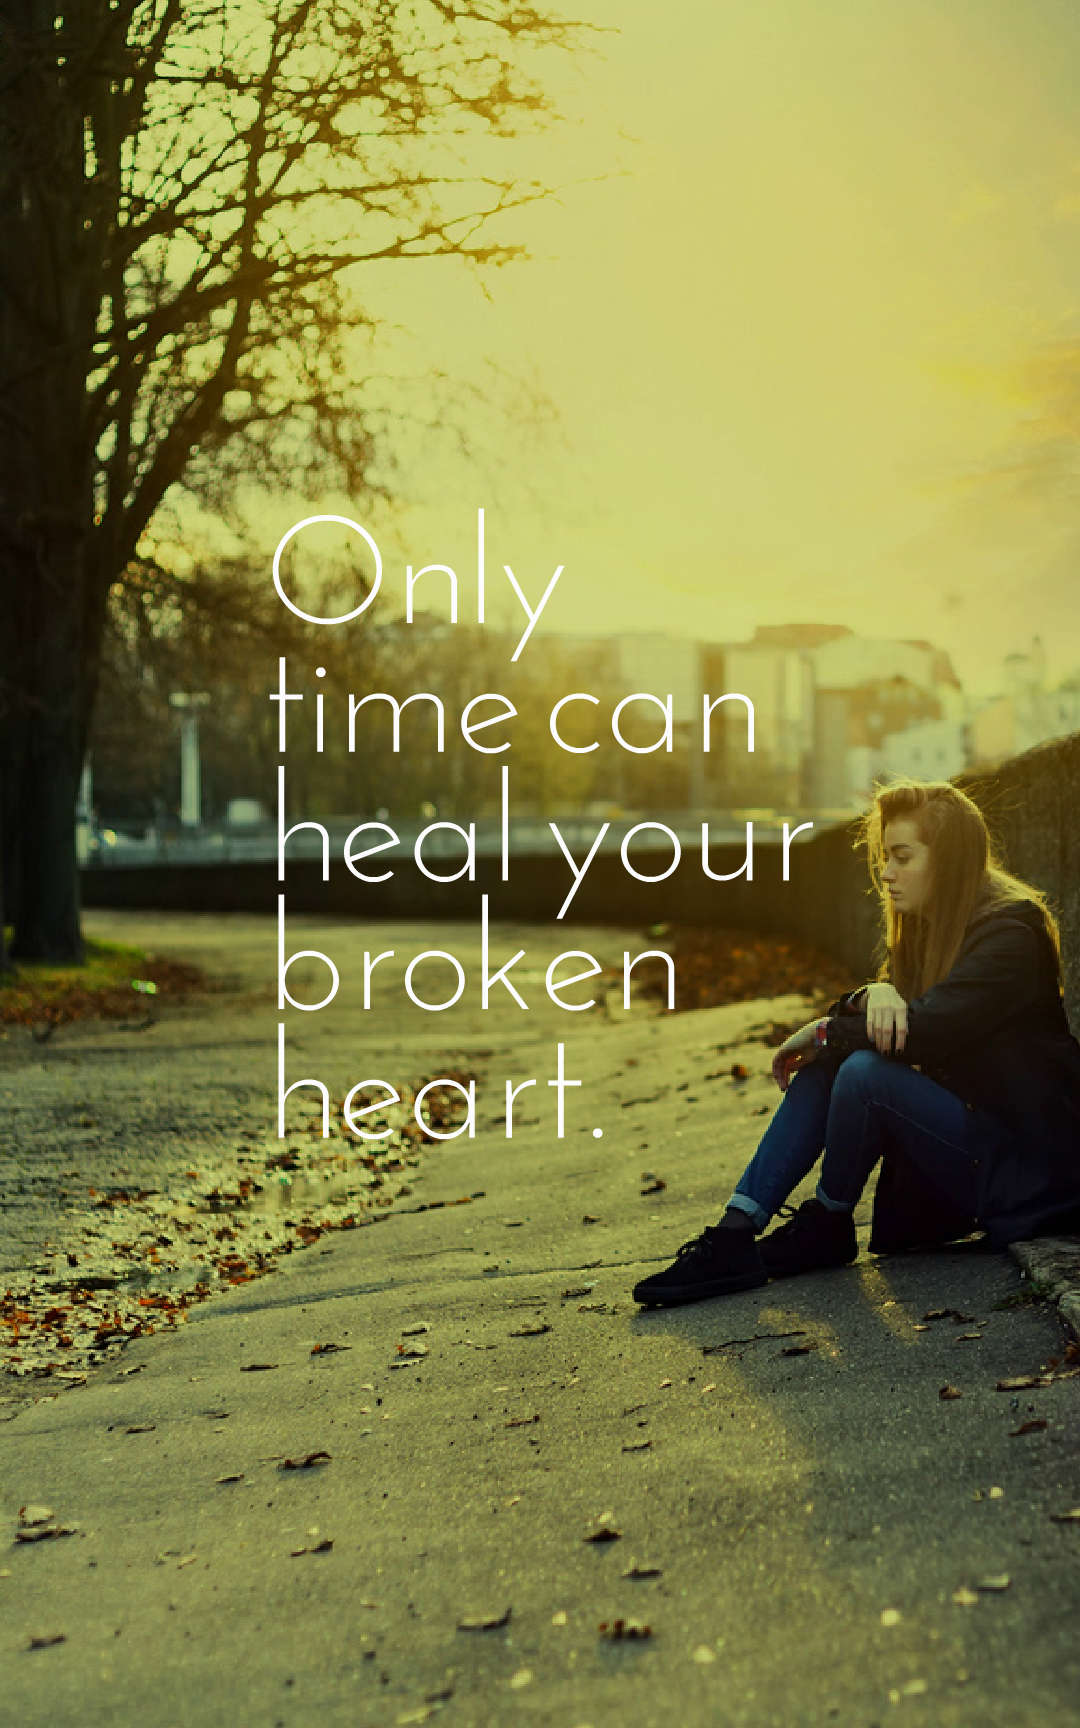 Only time can heal your broken heart.